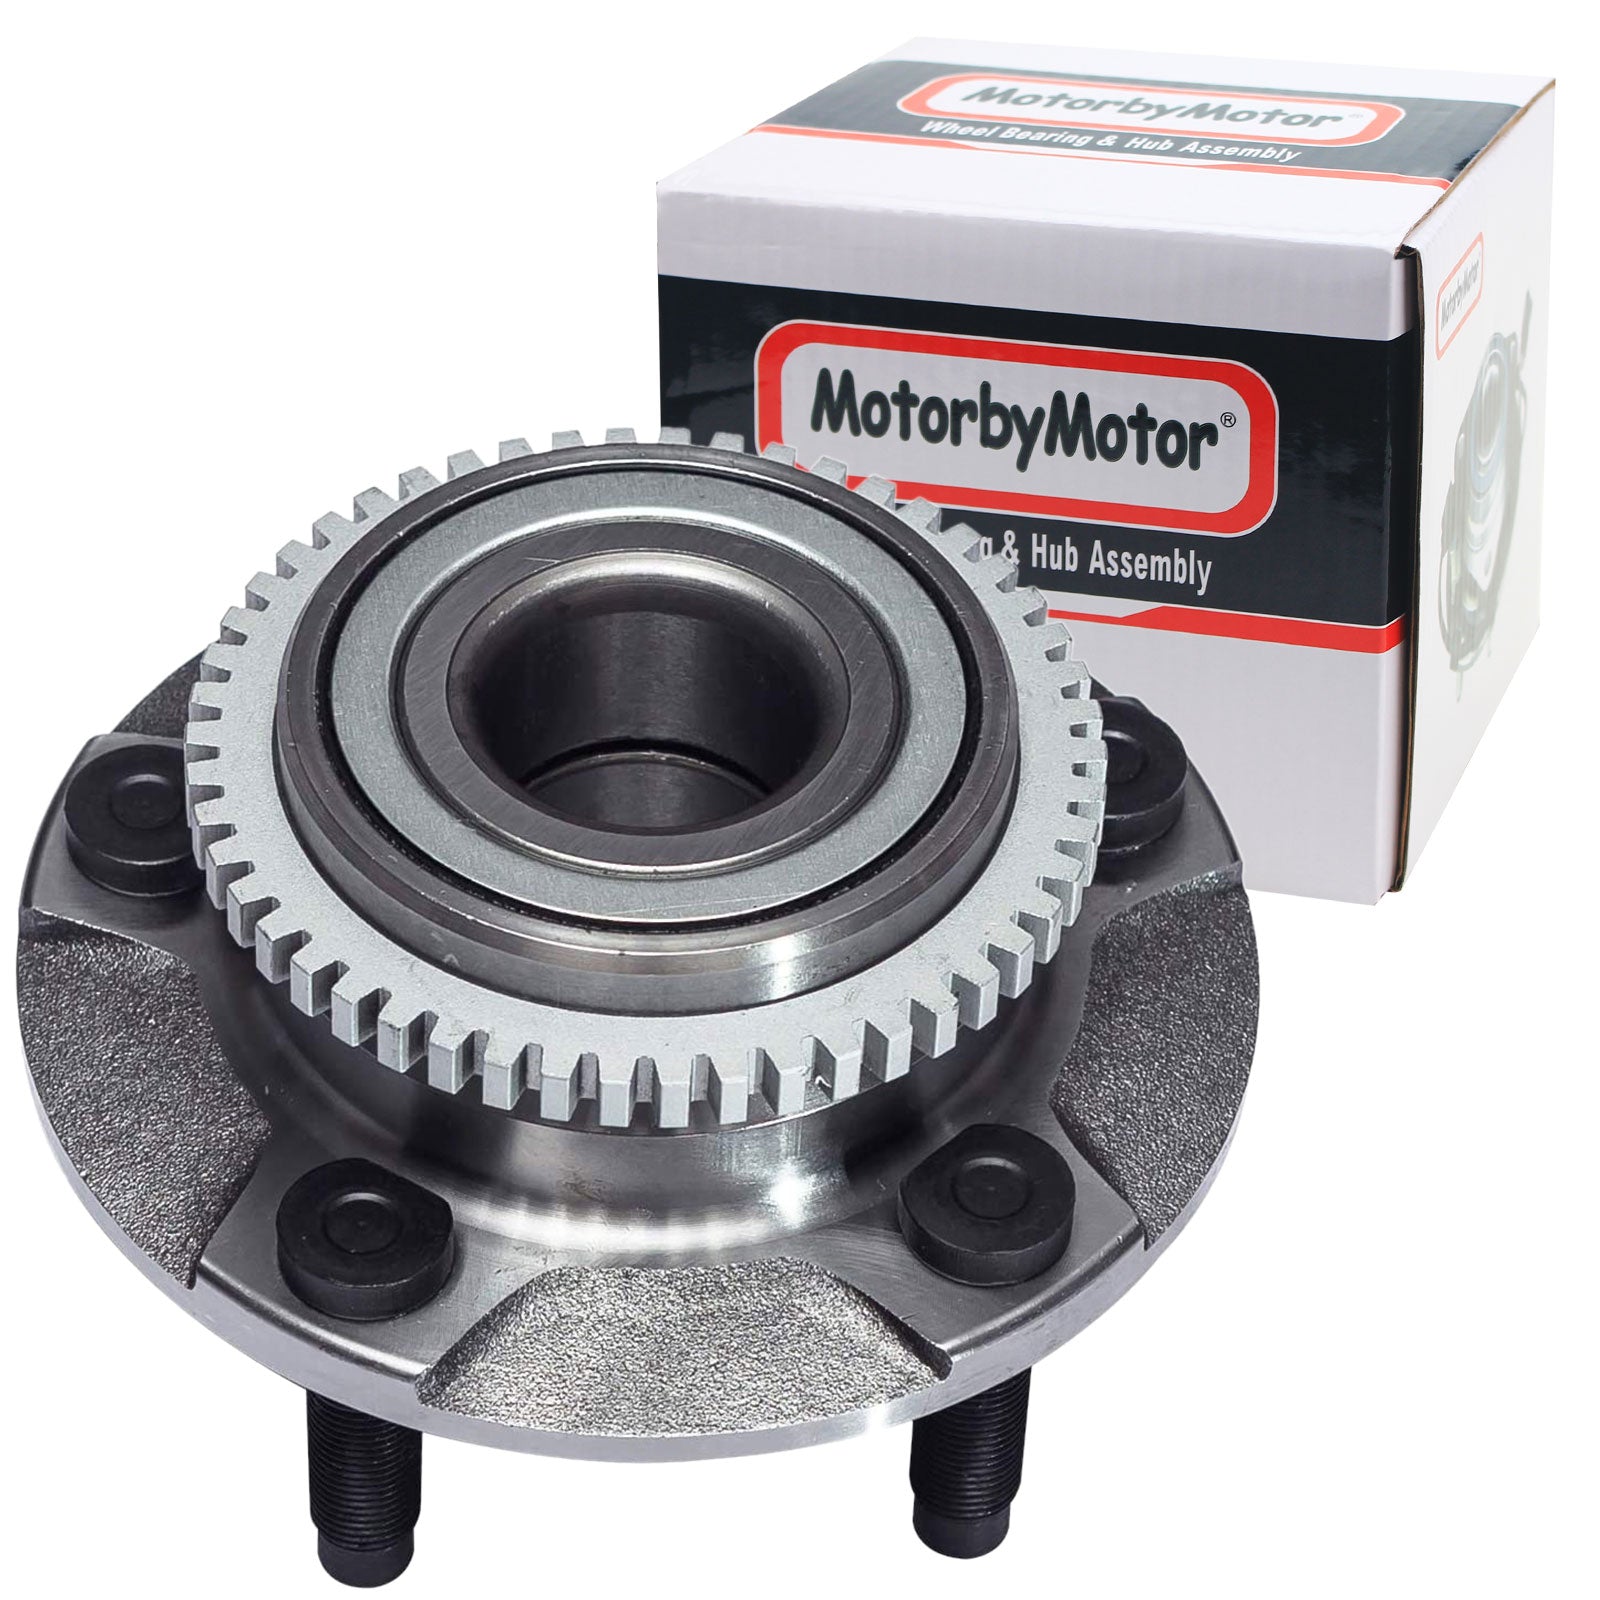 MotorbyMotor 513115 Front Heavy Duty Wheel Bearing Assembly with 5 Lugs Fits for 1994-2004 Ford Mustang Wheel Bearing and Hub Assembly (w/ABS Tone Ring) MotorbyMotor